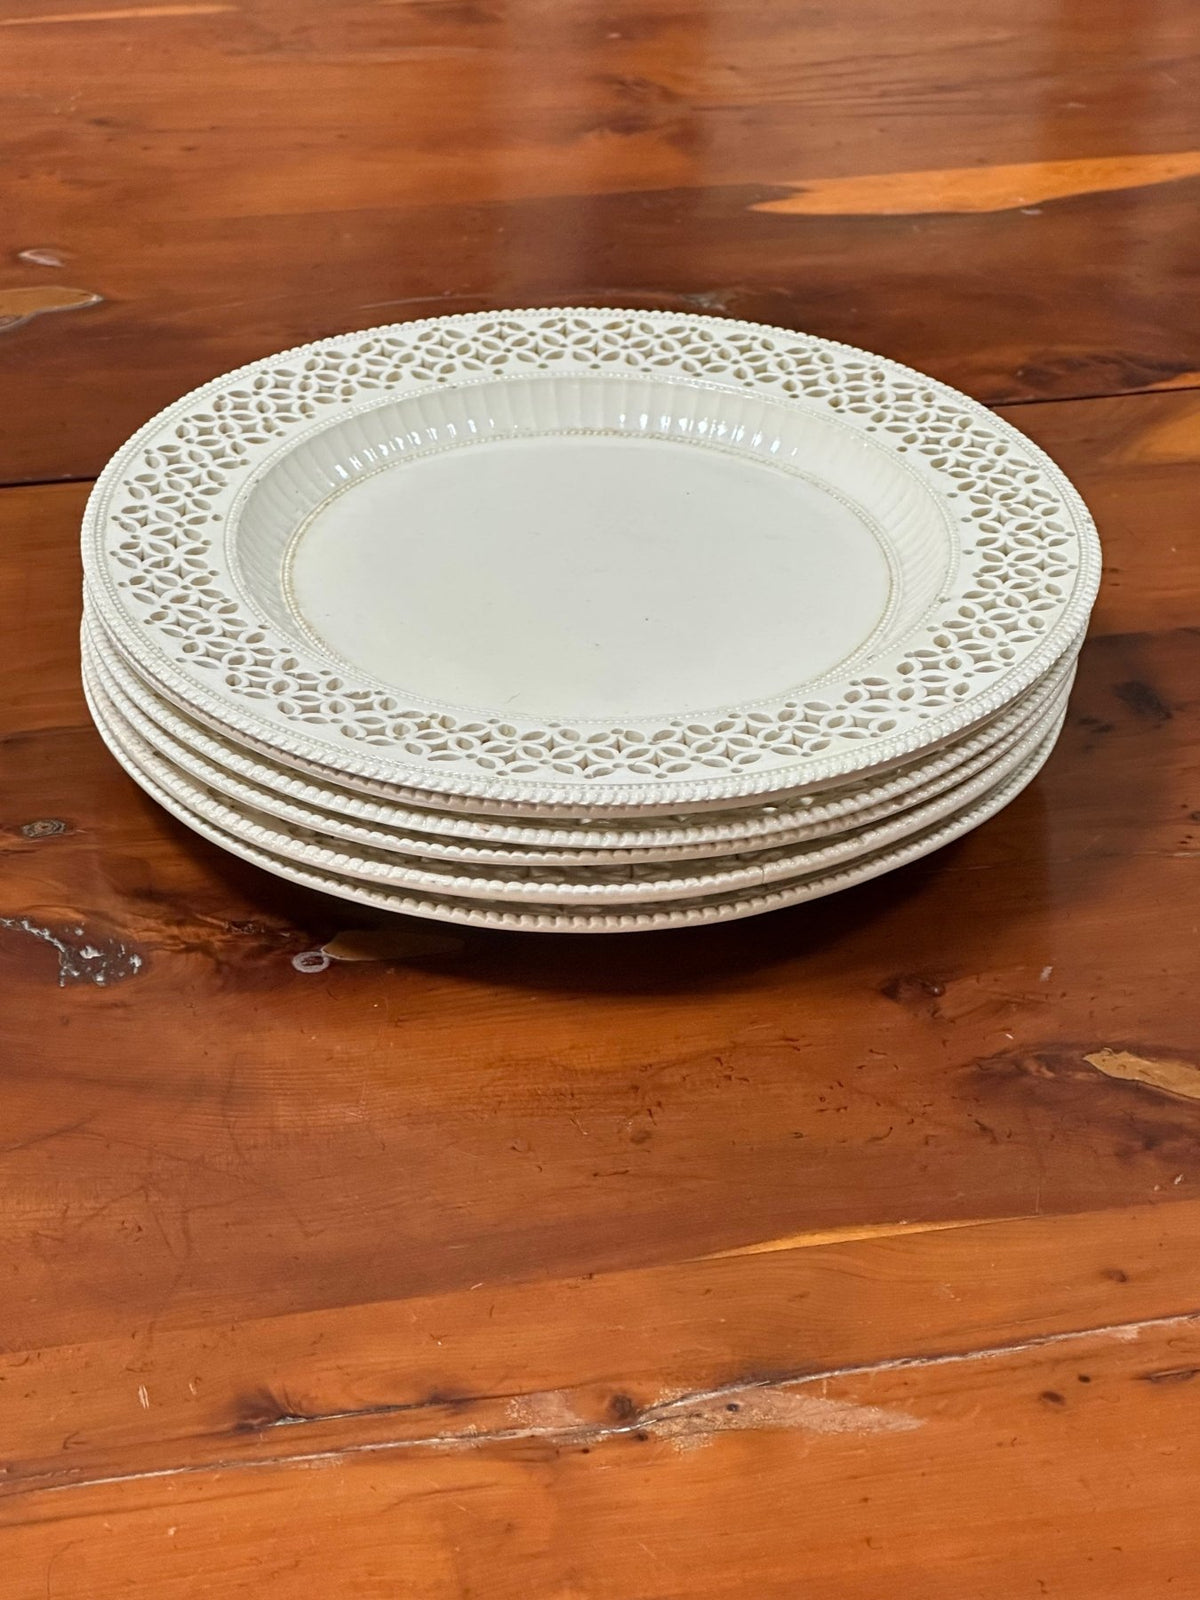 Set of Six Leeds Creamware Reticulated Plates, 18th Century - Helen Storey Antiques